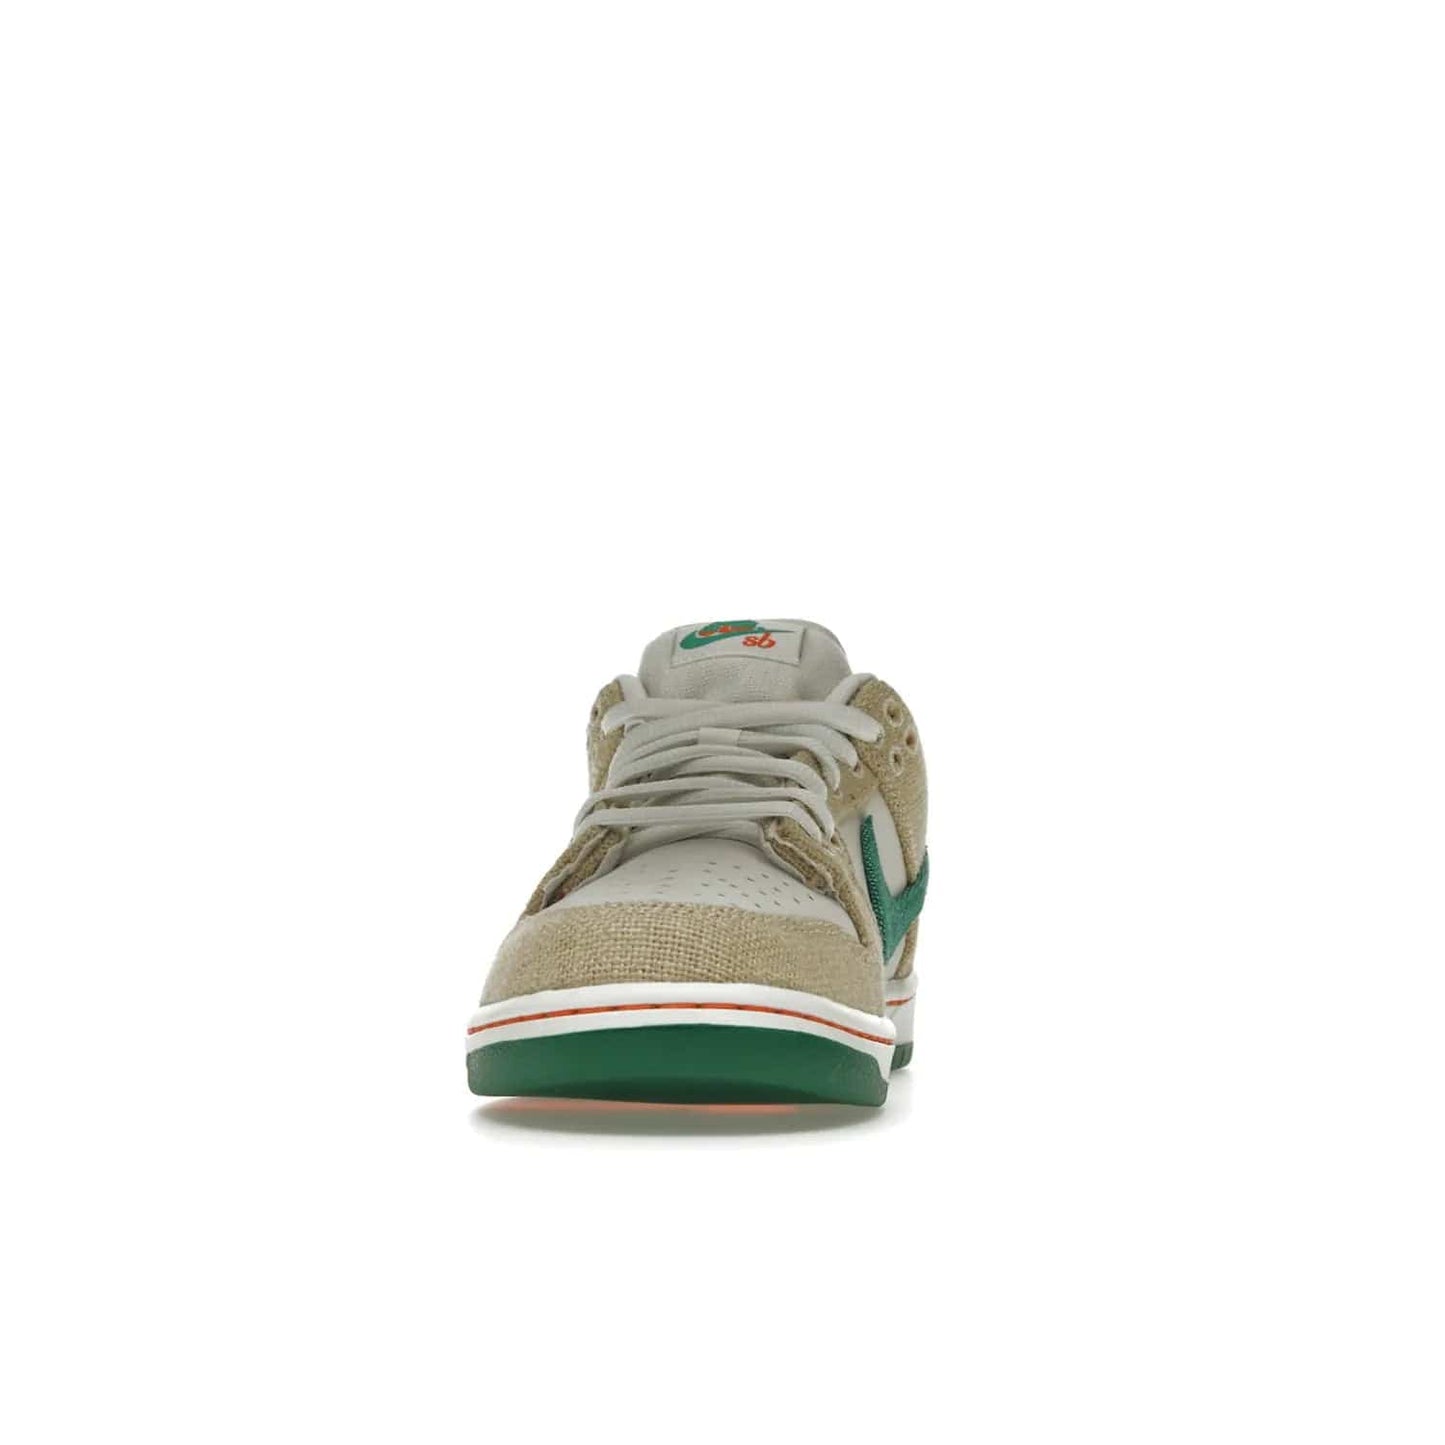 Nike SB Dunk Low Jarritos - Image 11 - Only at www.BallersClubKickz.com - Shop limited edition Nike SB Dunk Low Jarritos! Crafted with white leather and tear-away canvas materials with green accents. Includes orange, green, and white laces to customize your look. Available now.